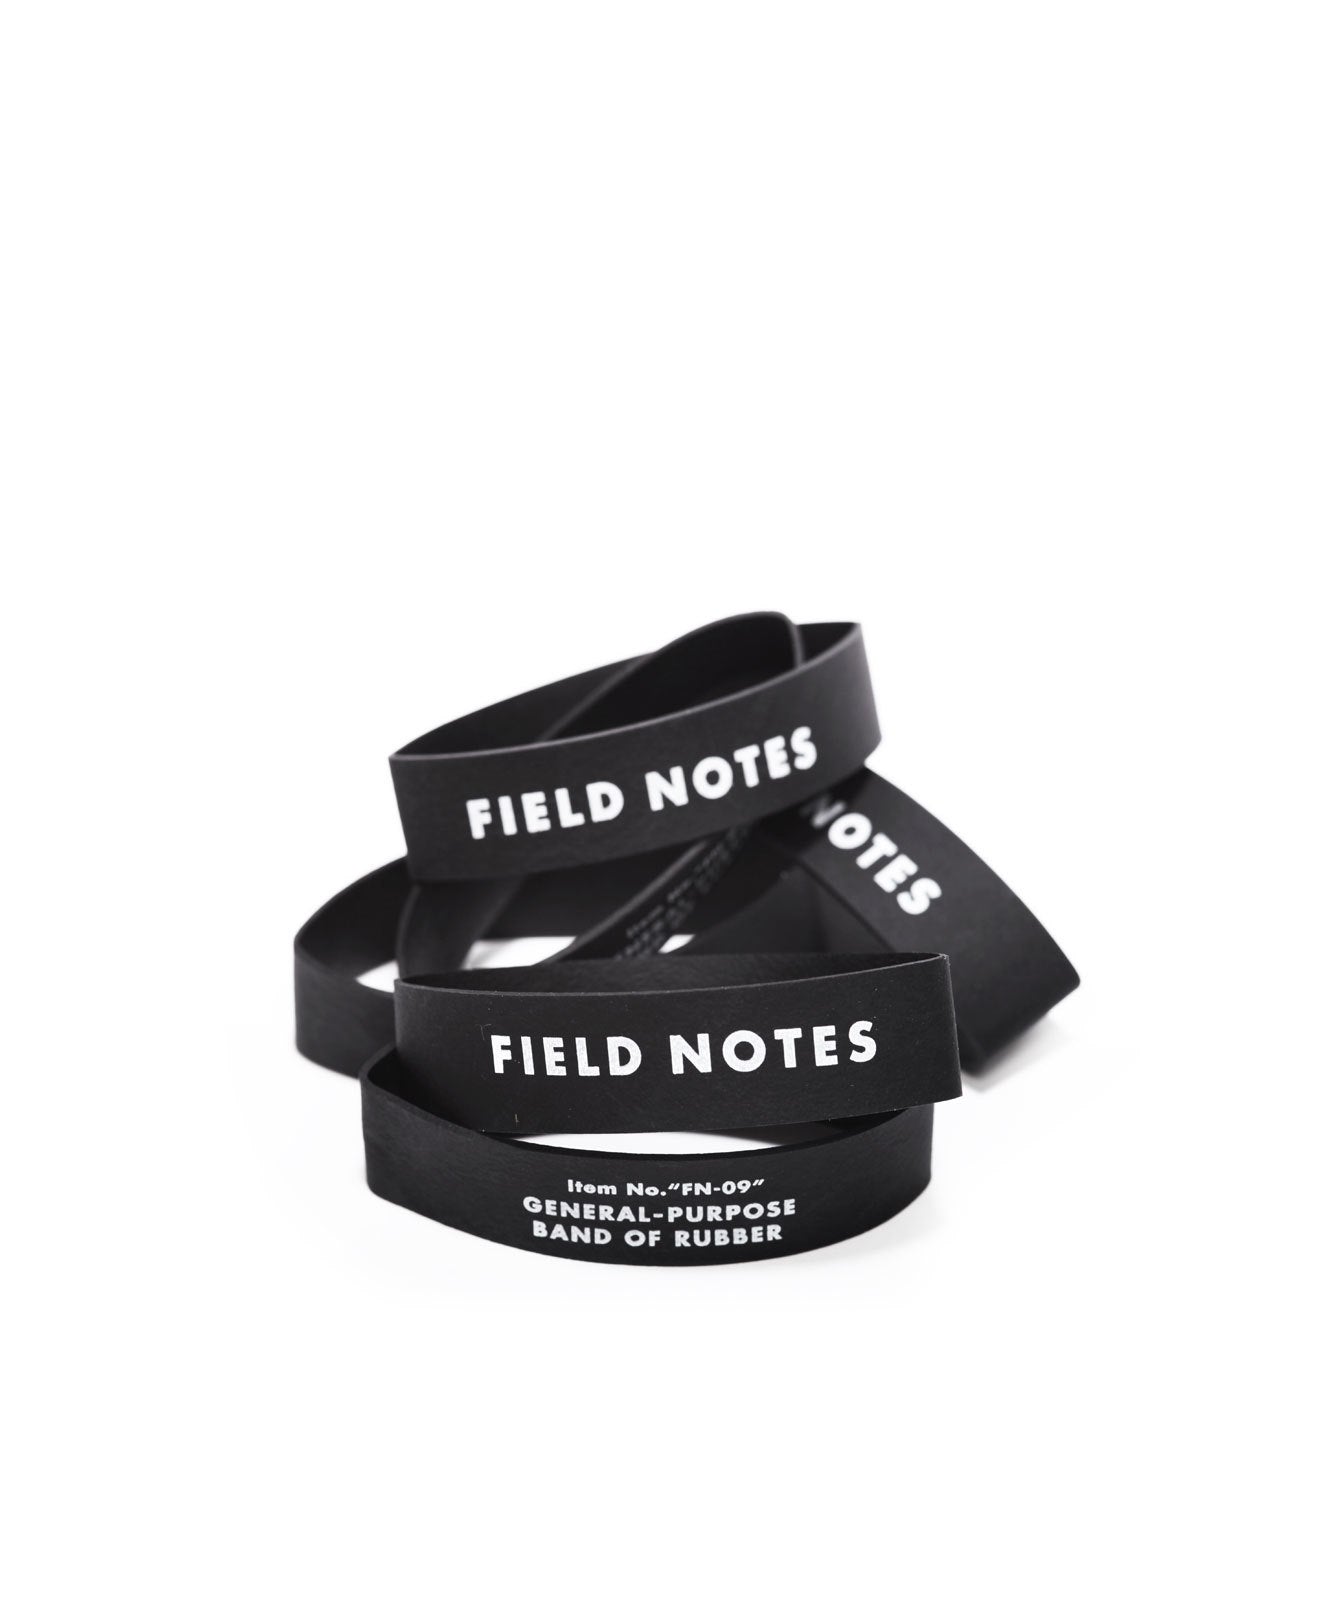 A pile of 3” by 5/8” black rubber bands with Field Notes logo in white ink.